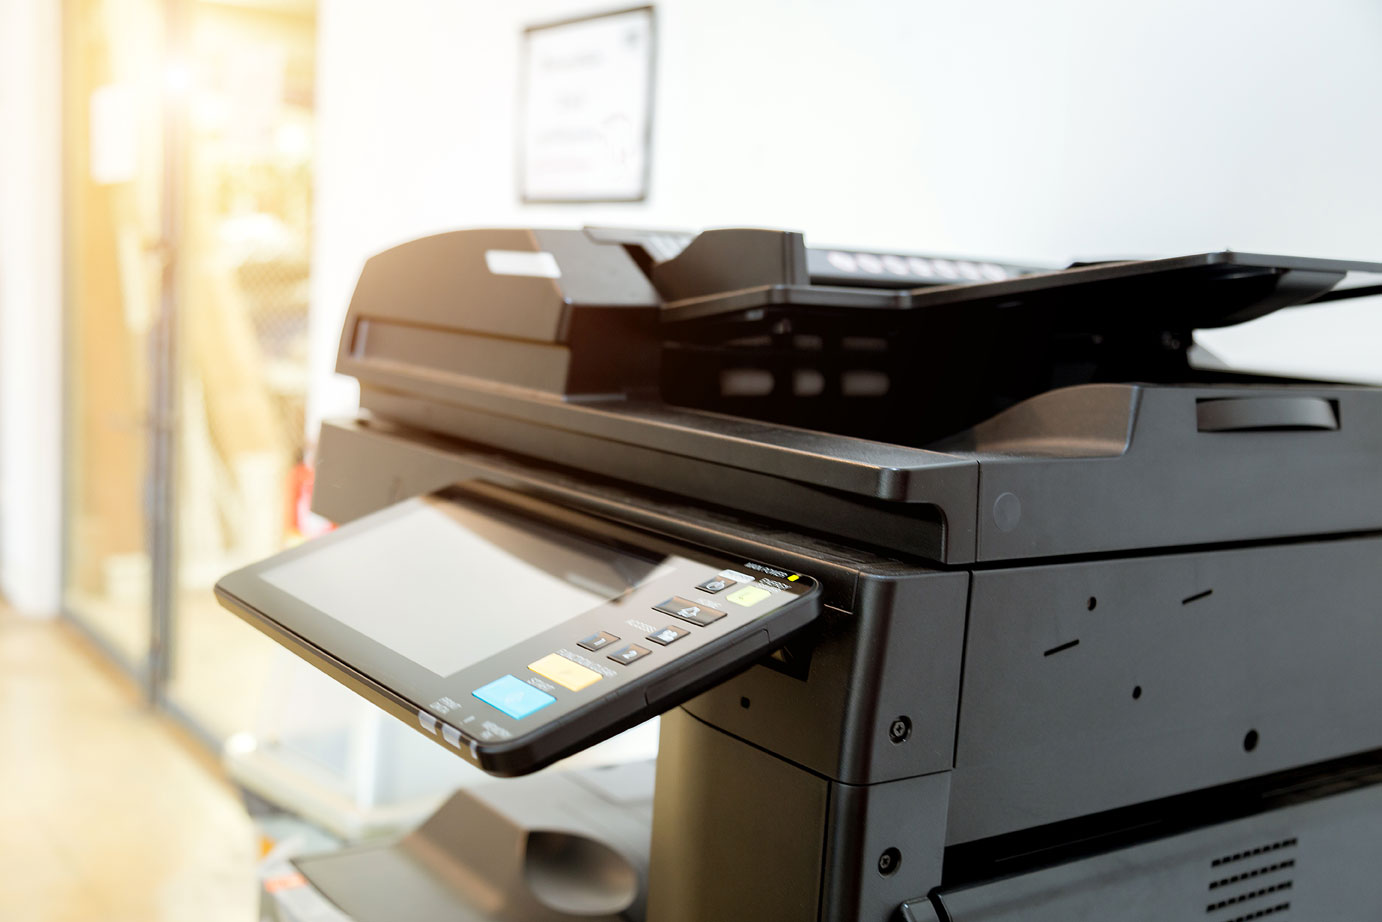 An Office Printer | As a Medical Equipment Parts Supplier in Houston, TX, We Can Also Provide Printers for Your Medical Facility